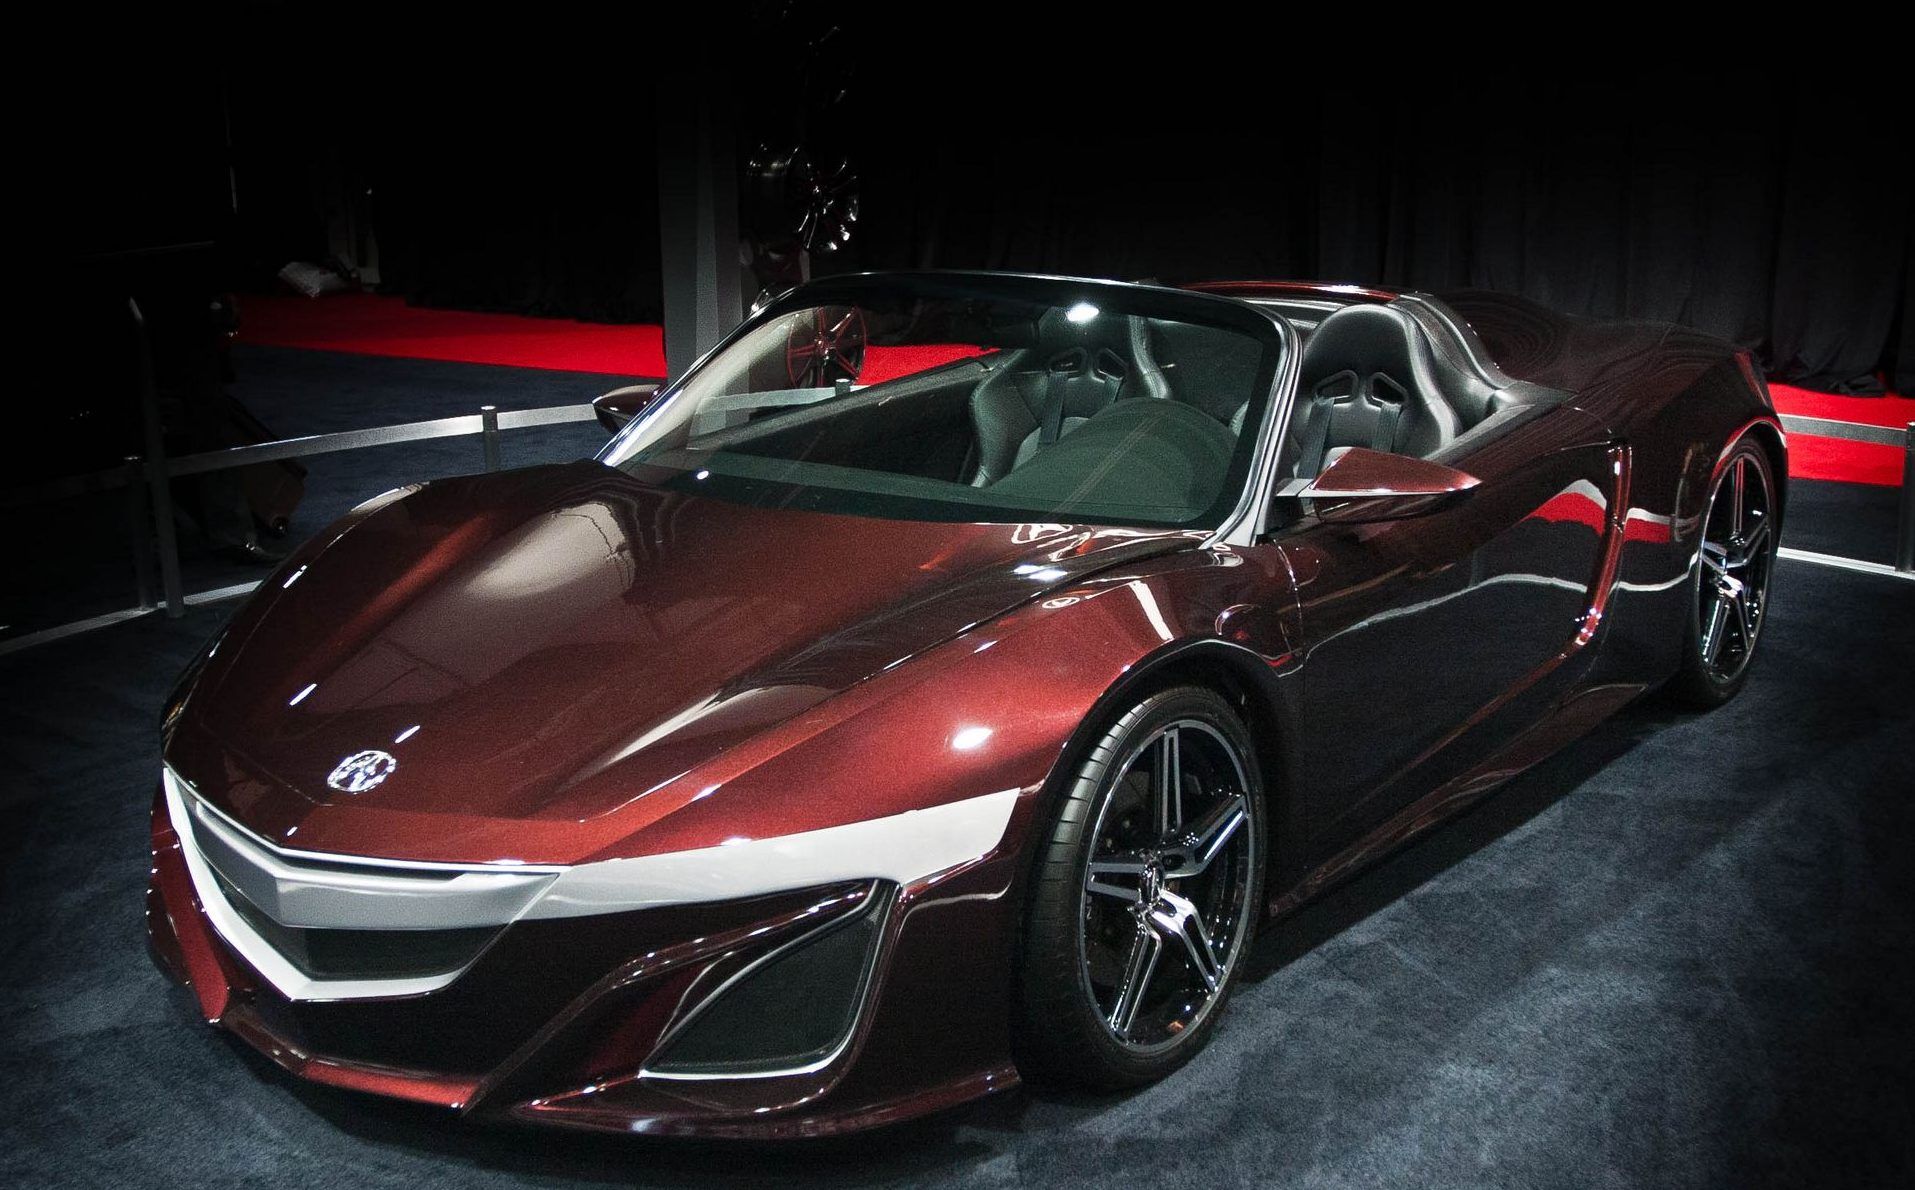 Acura NSX Concept (featured in Iron Man 2, "The Avengers")